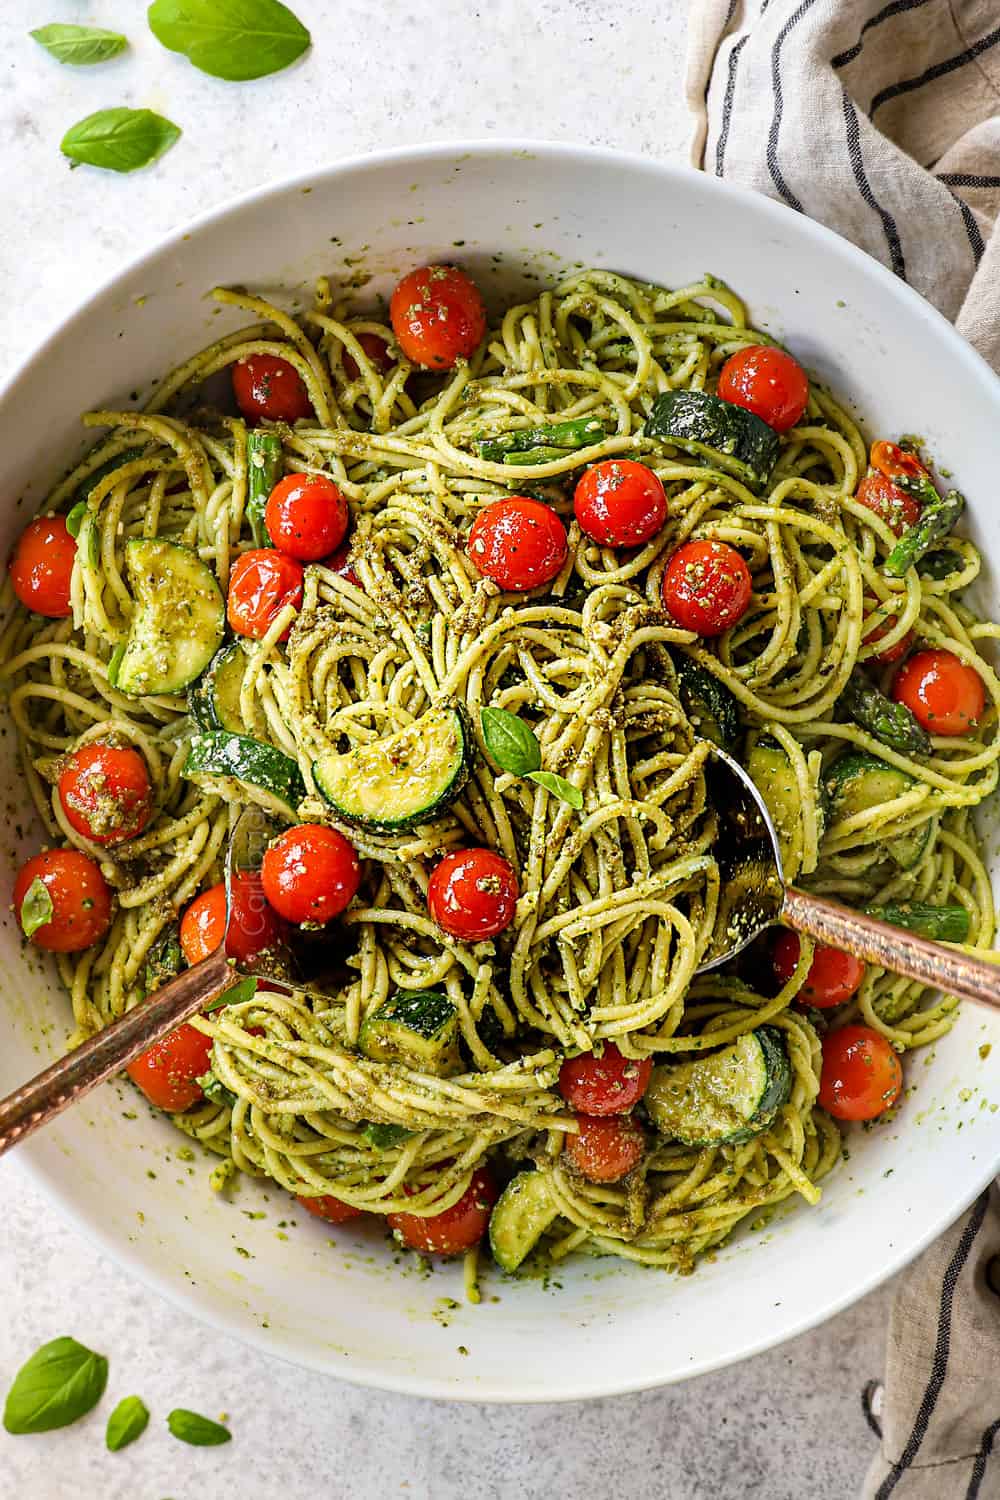 showing how to make pesto pasta recipes by tossing pesto, pasta and vegetables together